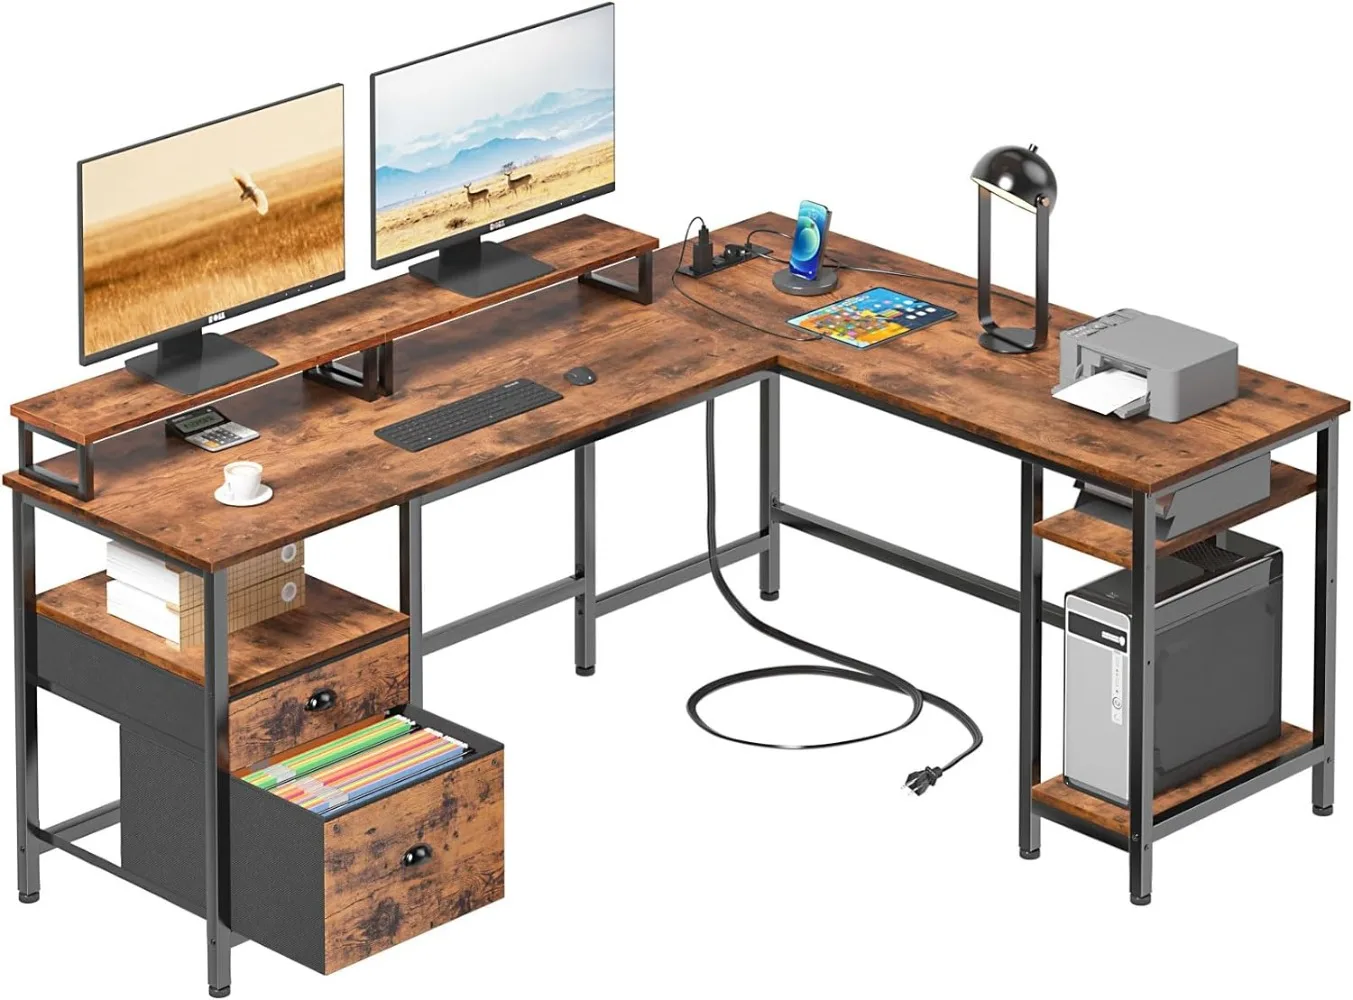 Furologee 66” L Shaped Desk with Power Outlet, Reversible Computer Desk with File Drawer & 2 Monitor Stands, Home Office Desk computer desk with monitor stand small home office desks with storage drawer